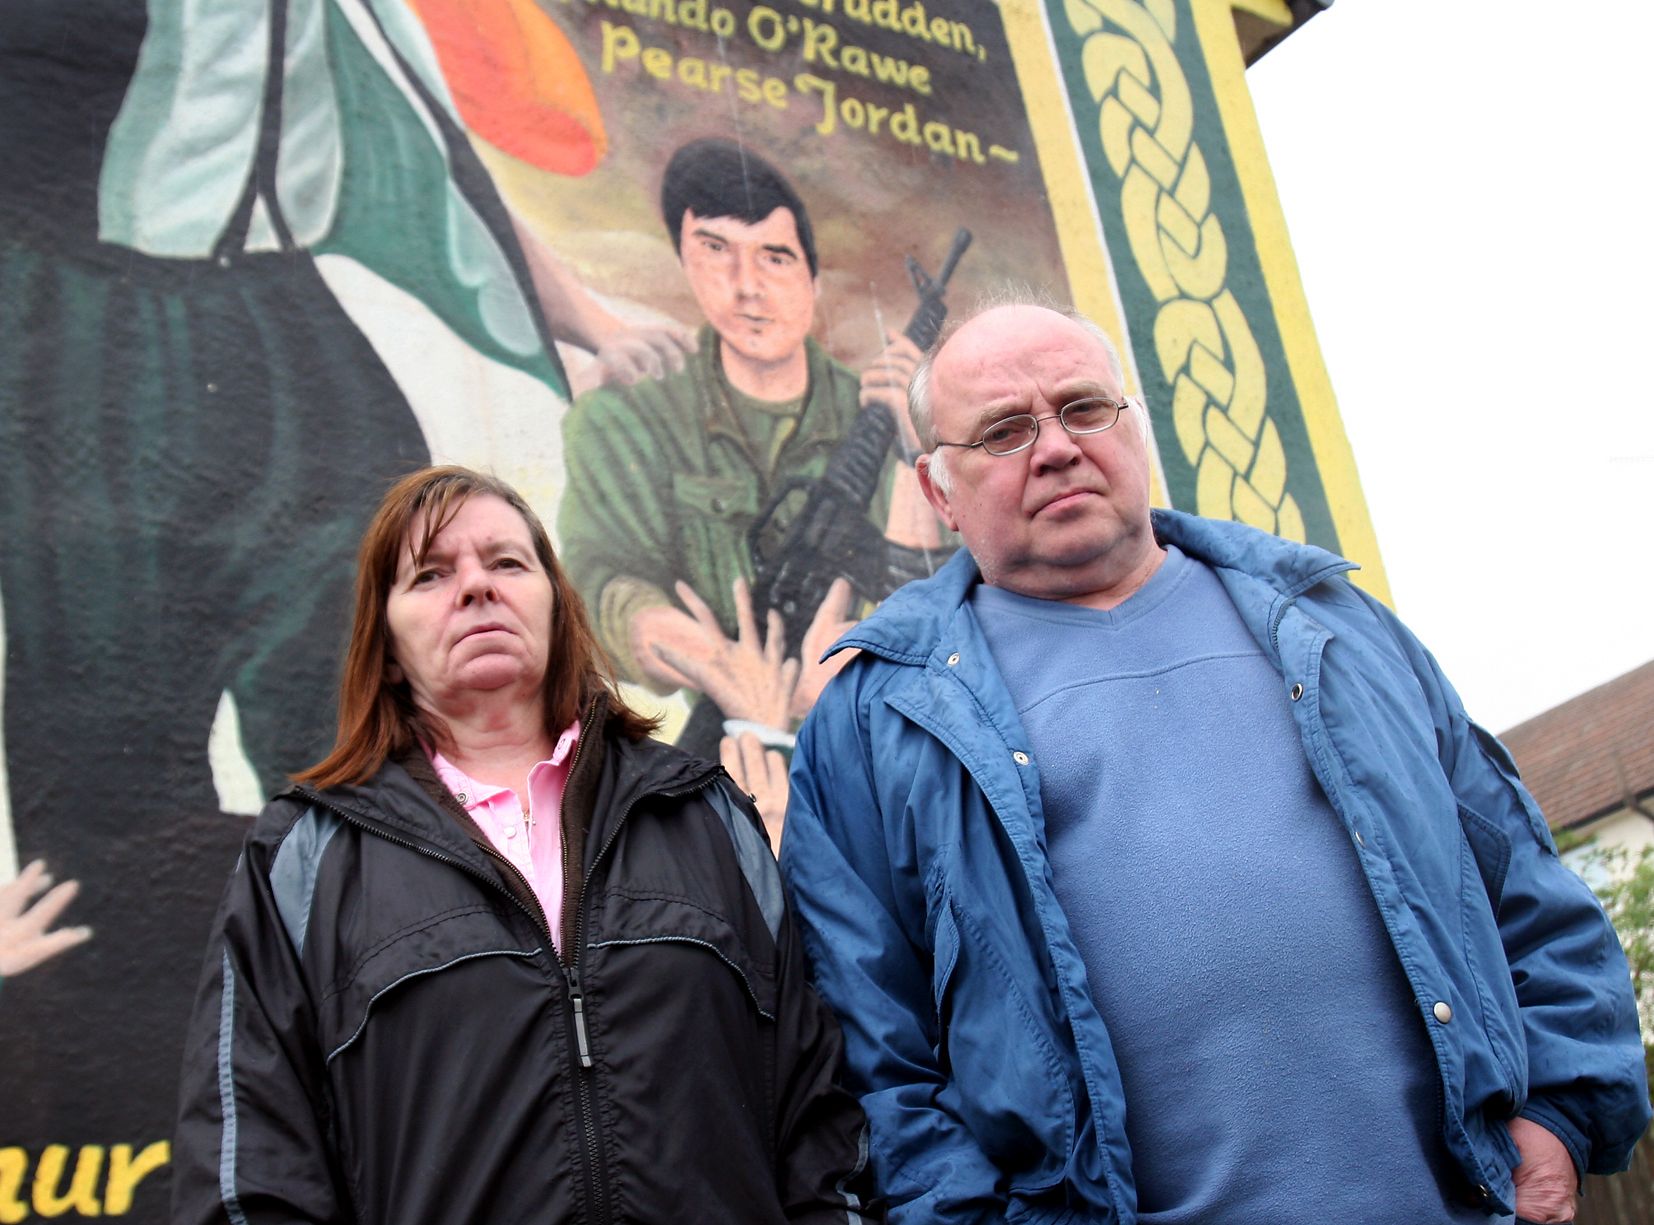 Tributes to Hugh Jordan who spent 28 years campaigning for the truth son Pearse's killing